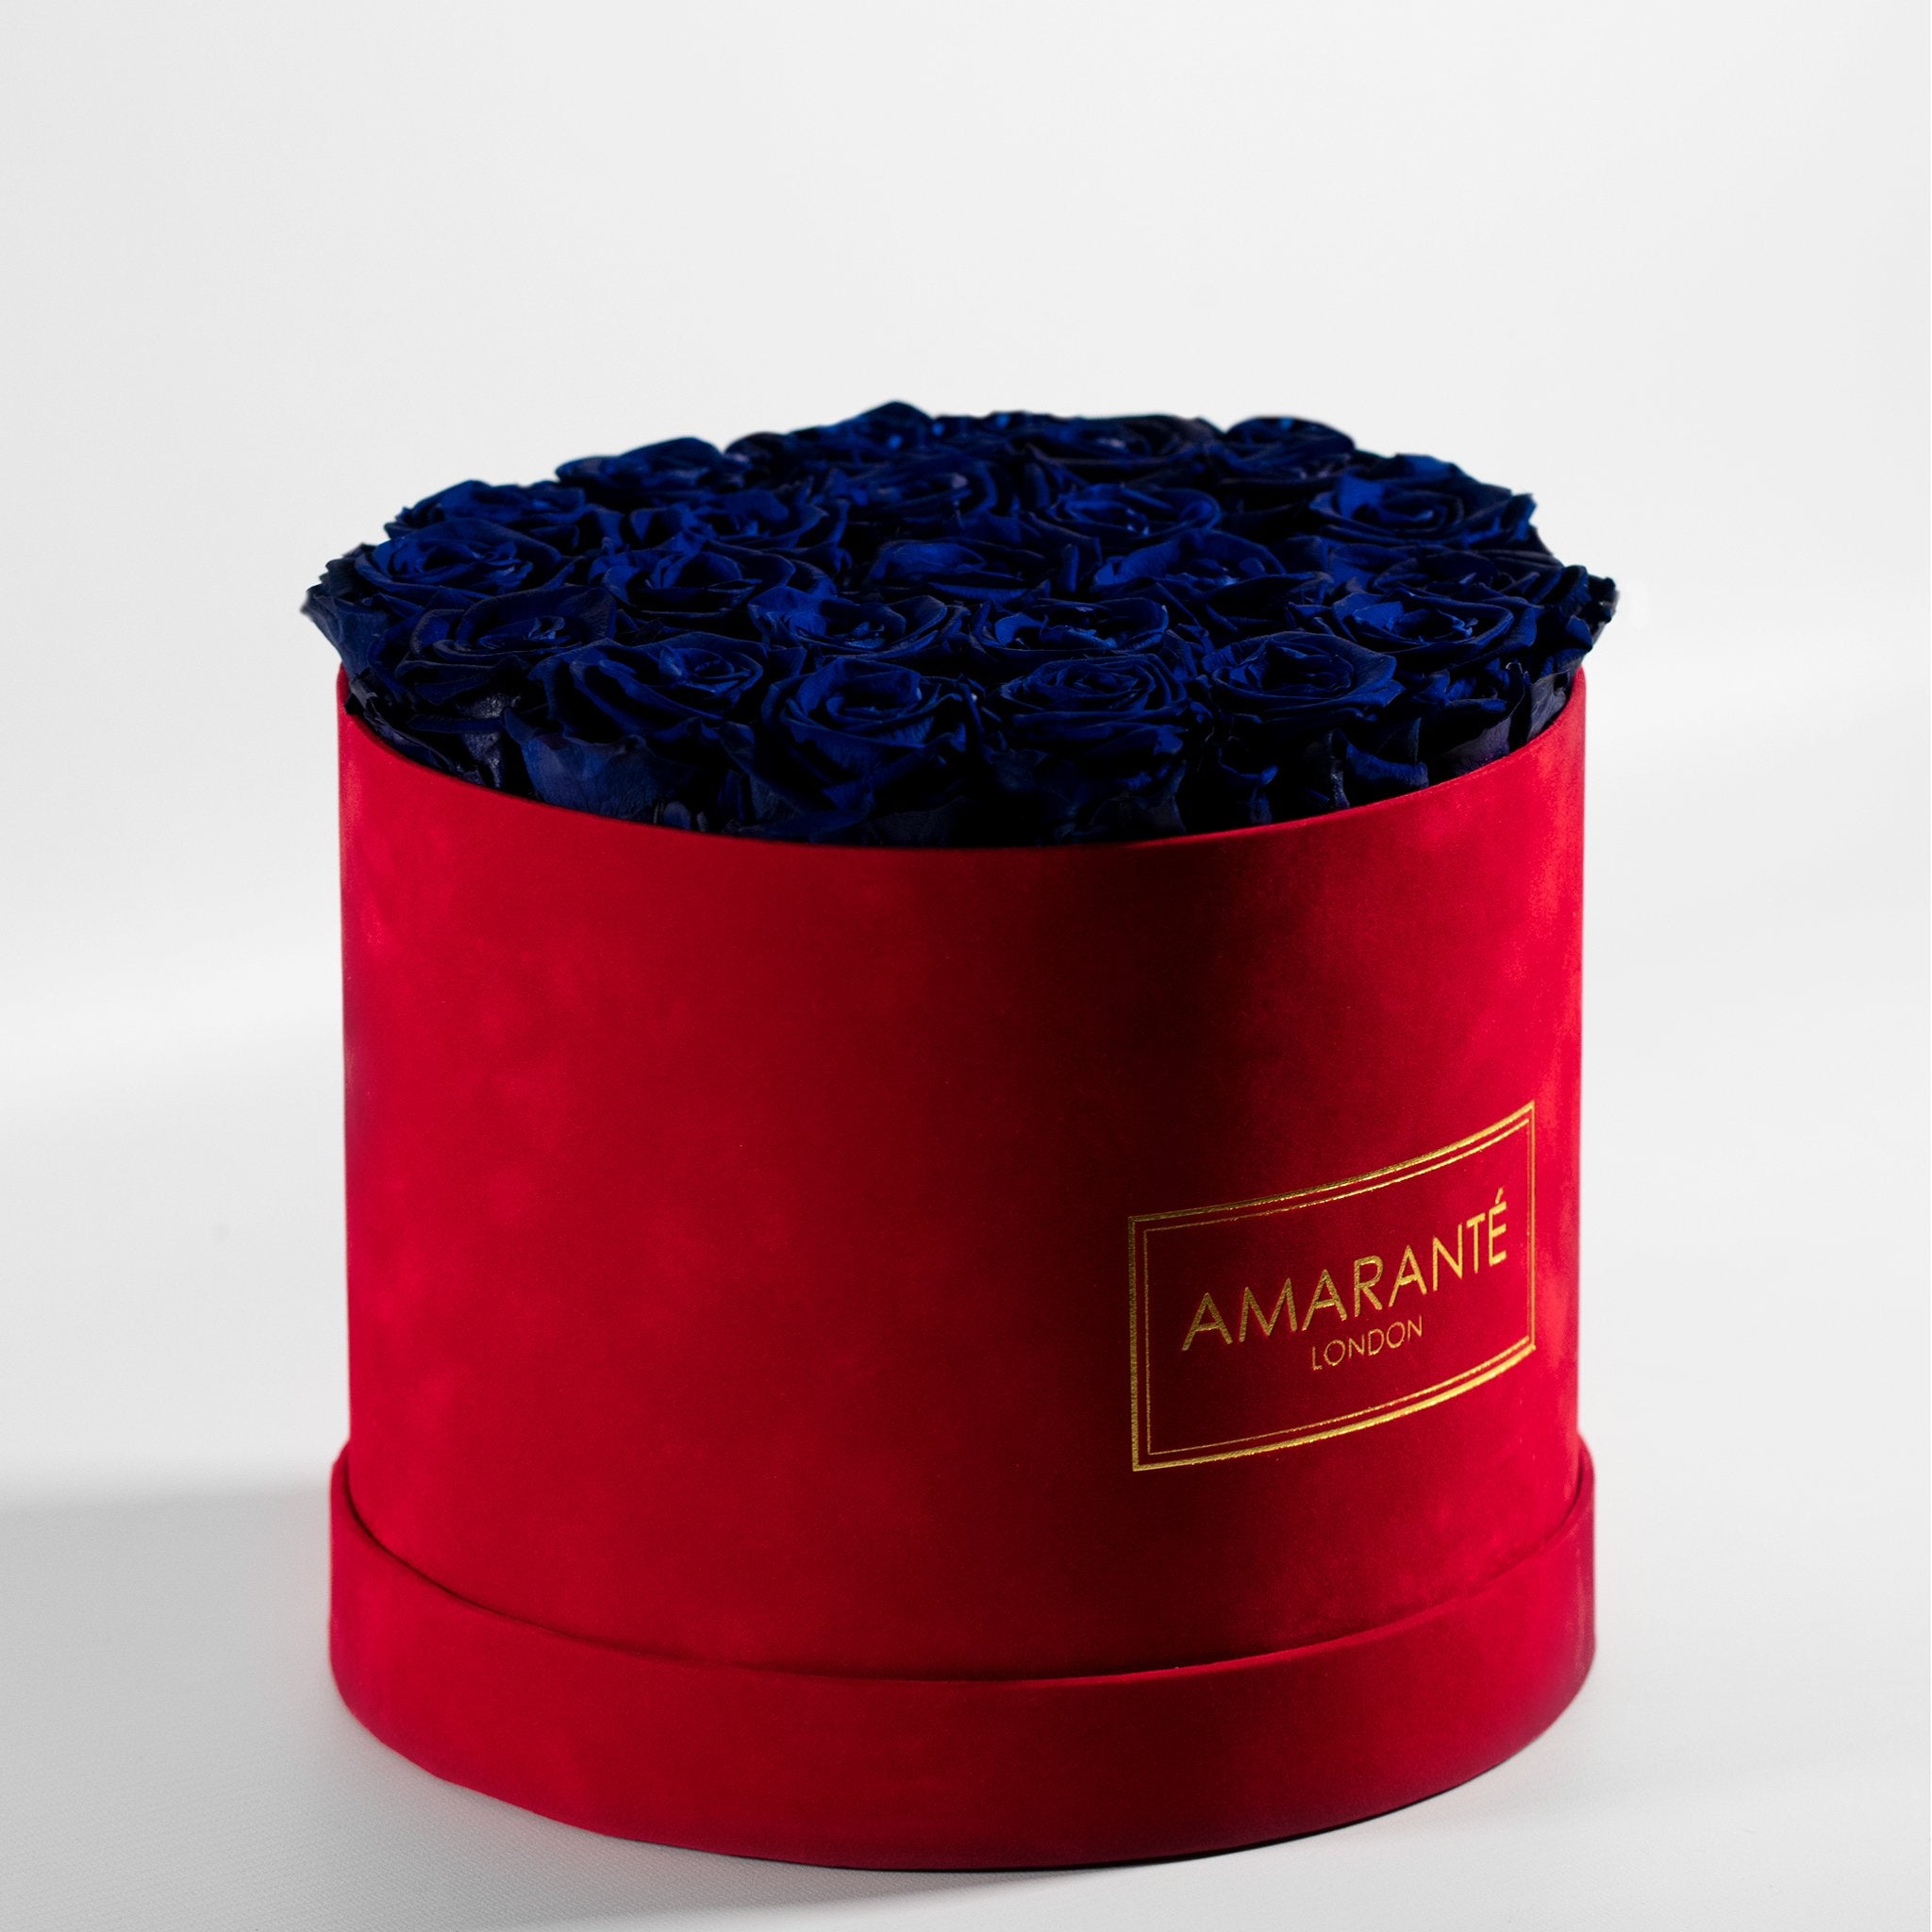 Luxurious royal purple Roses in a modish red box denoting protection and healing 